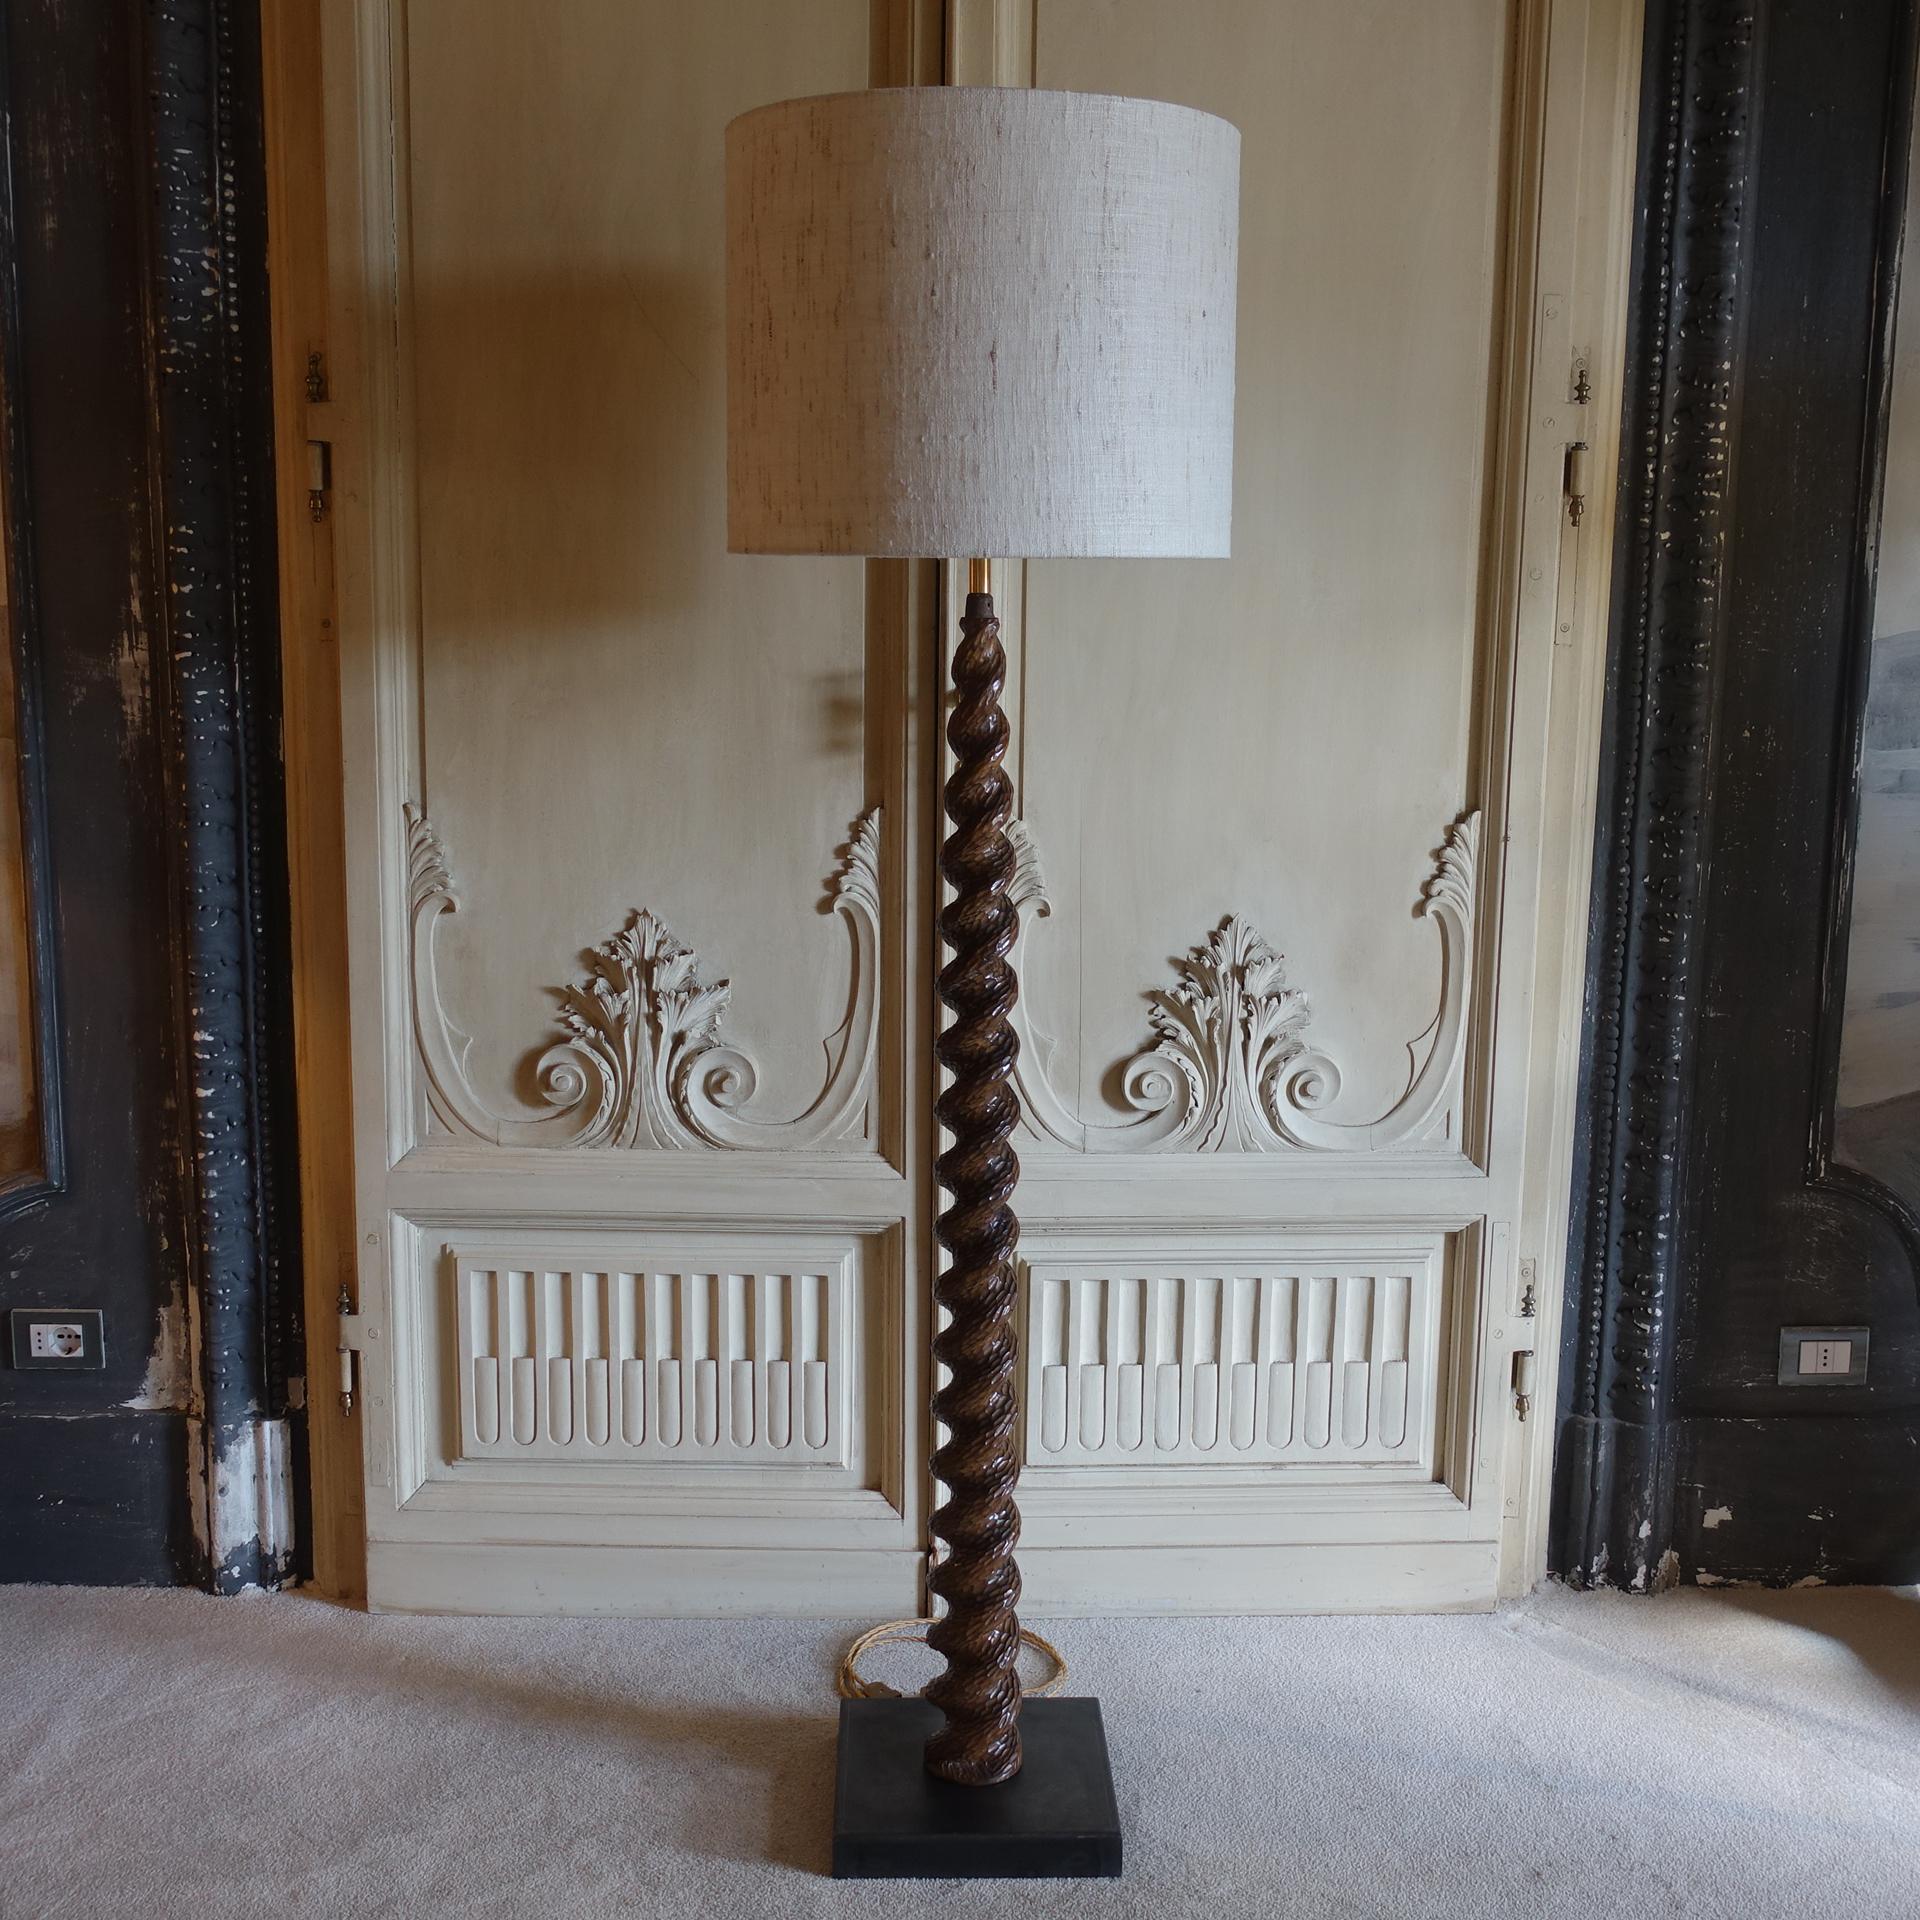 One of a kind floor lamp realized with 1960s spiral carved wood element and brutalist steel base, vintage patina, base measures cm 30x30xh.142, raw silk shantung lampshade cm Dia.50xh.40, total height cm 177.